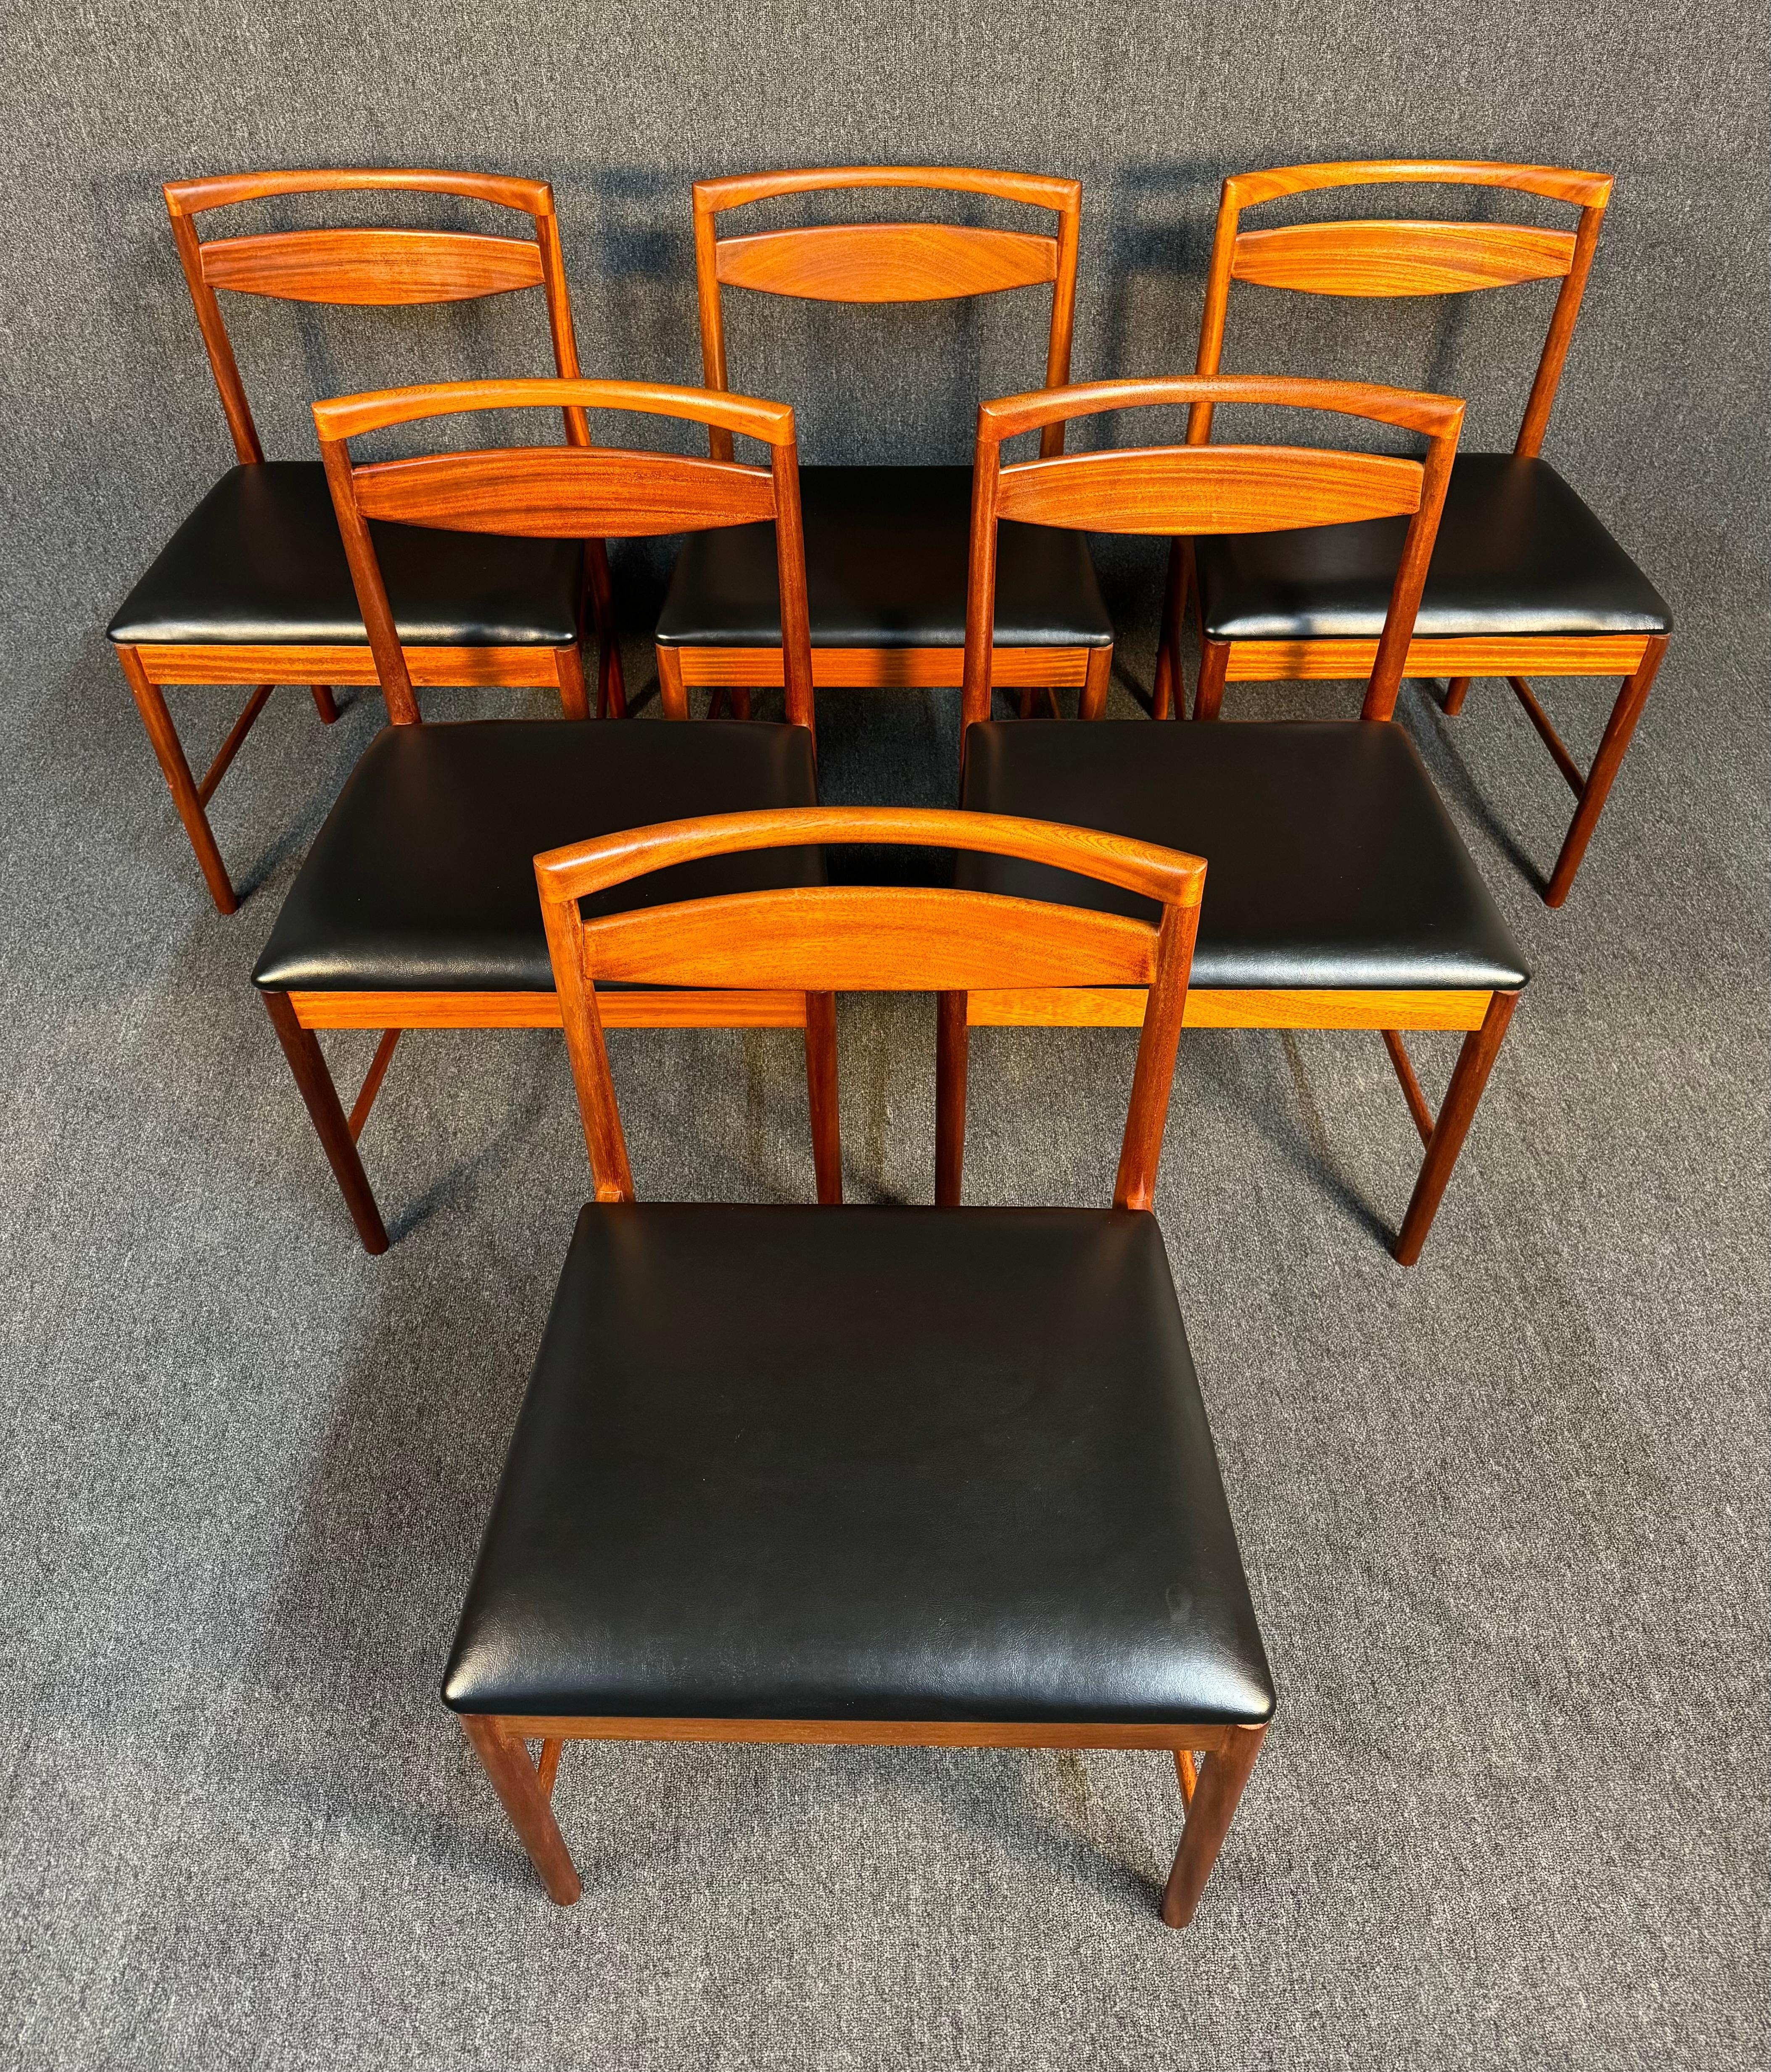 Here is a beautiful set of six British Mid Century Modern dining chairs in mahogany Model 9433 manufactured by A.H. McIntosh in Scotland in the 1960s. This comfortable set, recently imported from Europe to California before its refinishing, features